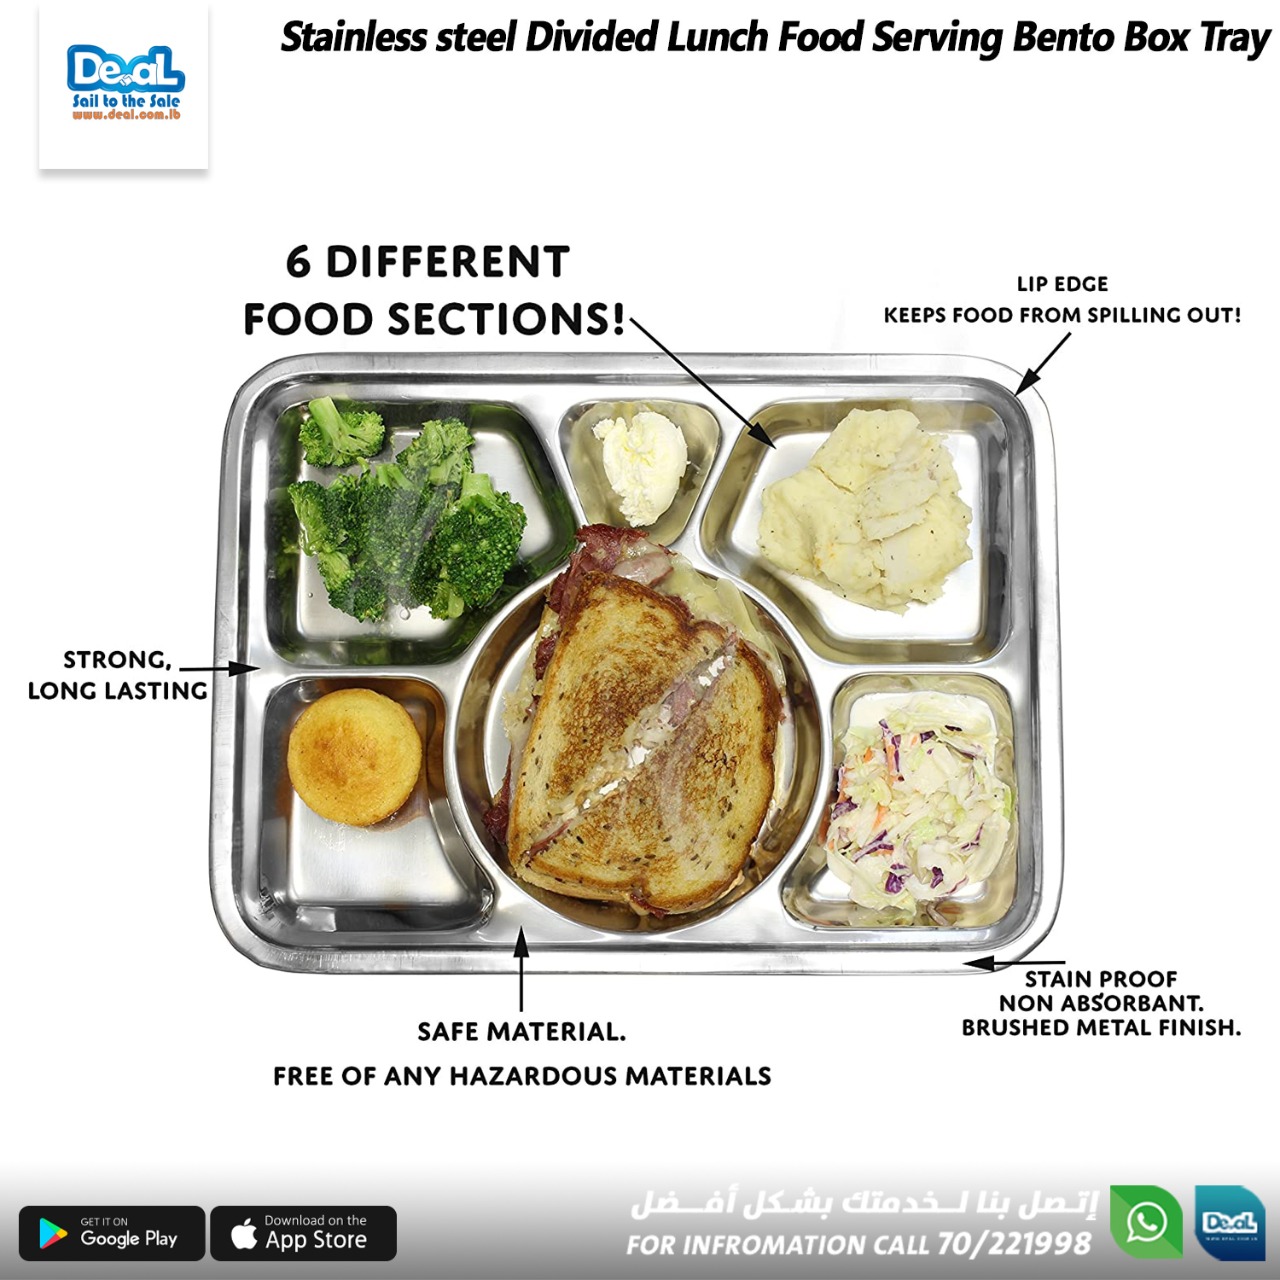 Stainless steel Divided Lunch Food Serving Bento Box Tray